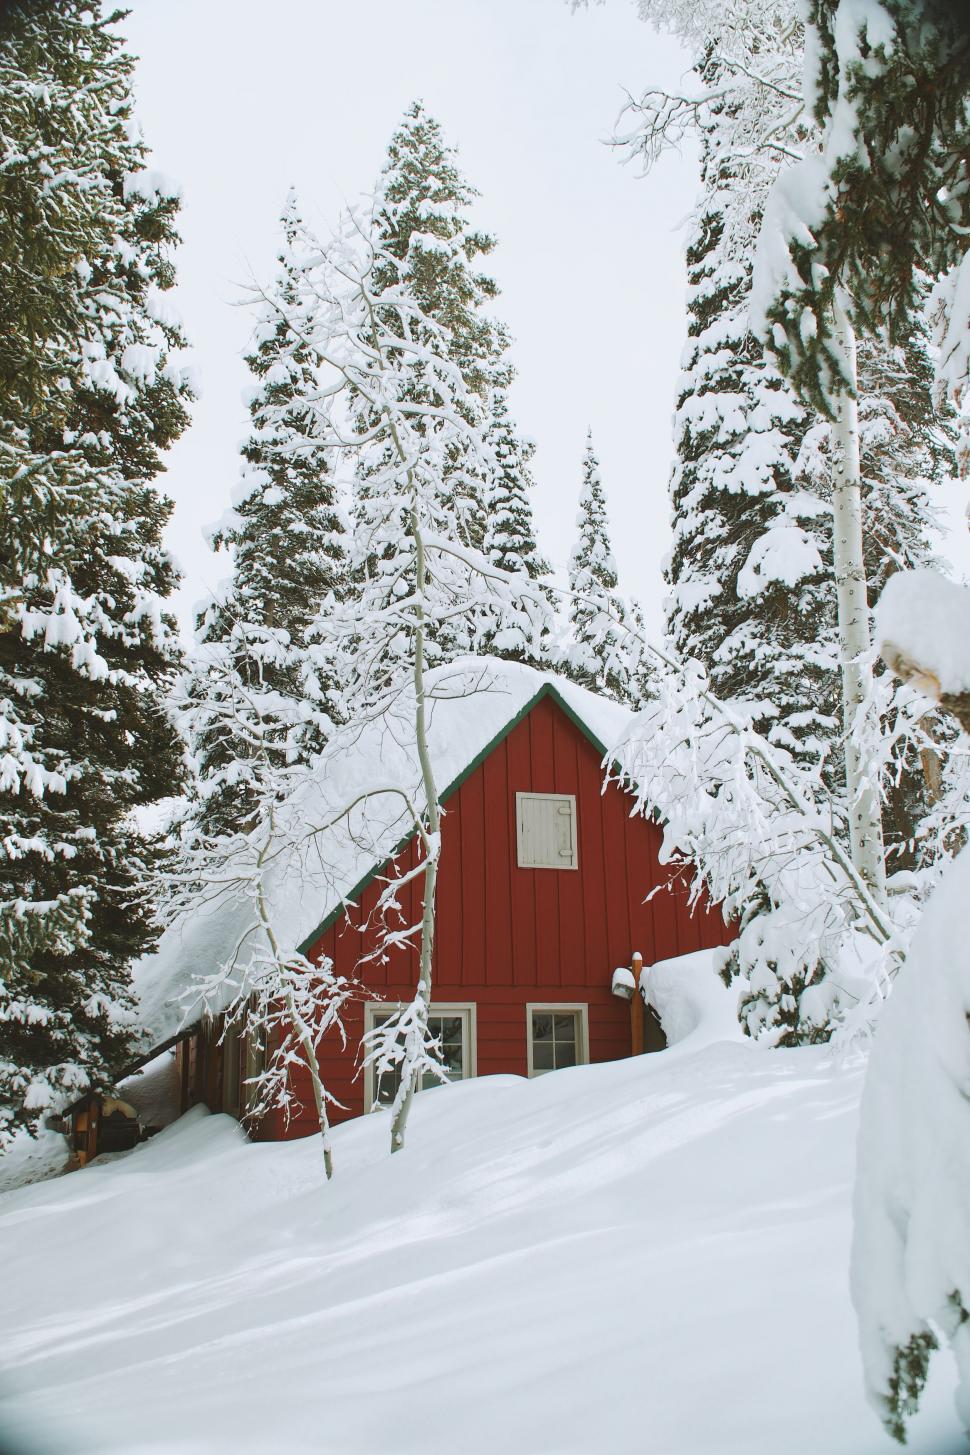 Free Image of Red Cabin in Snowy Forest 